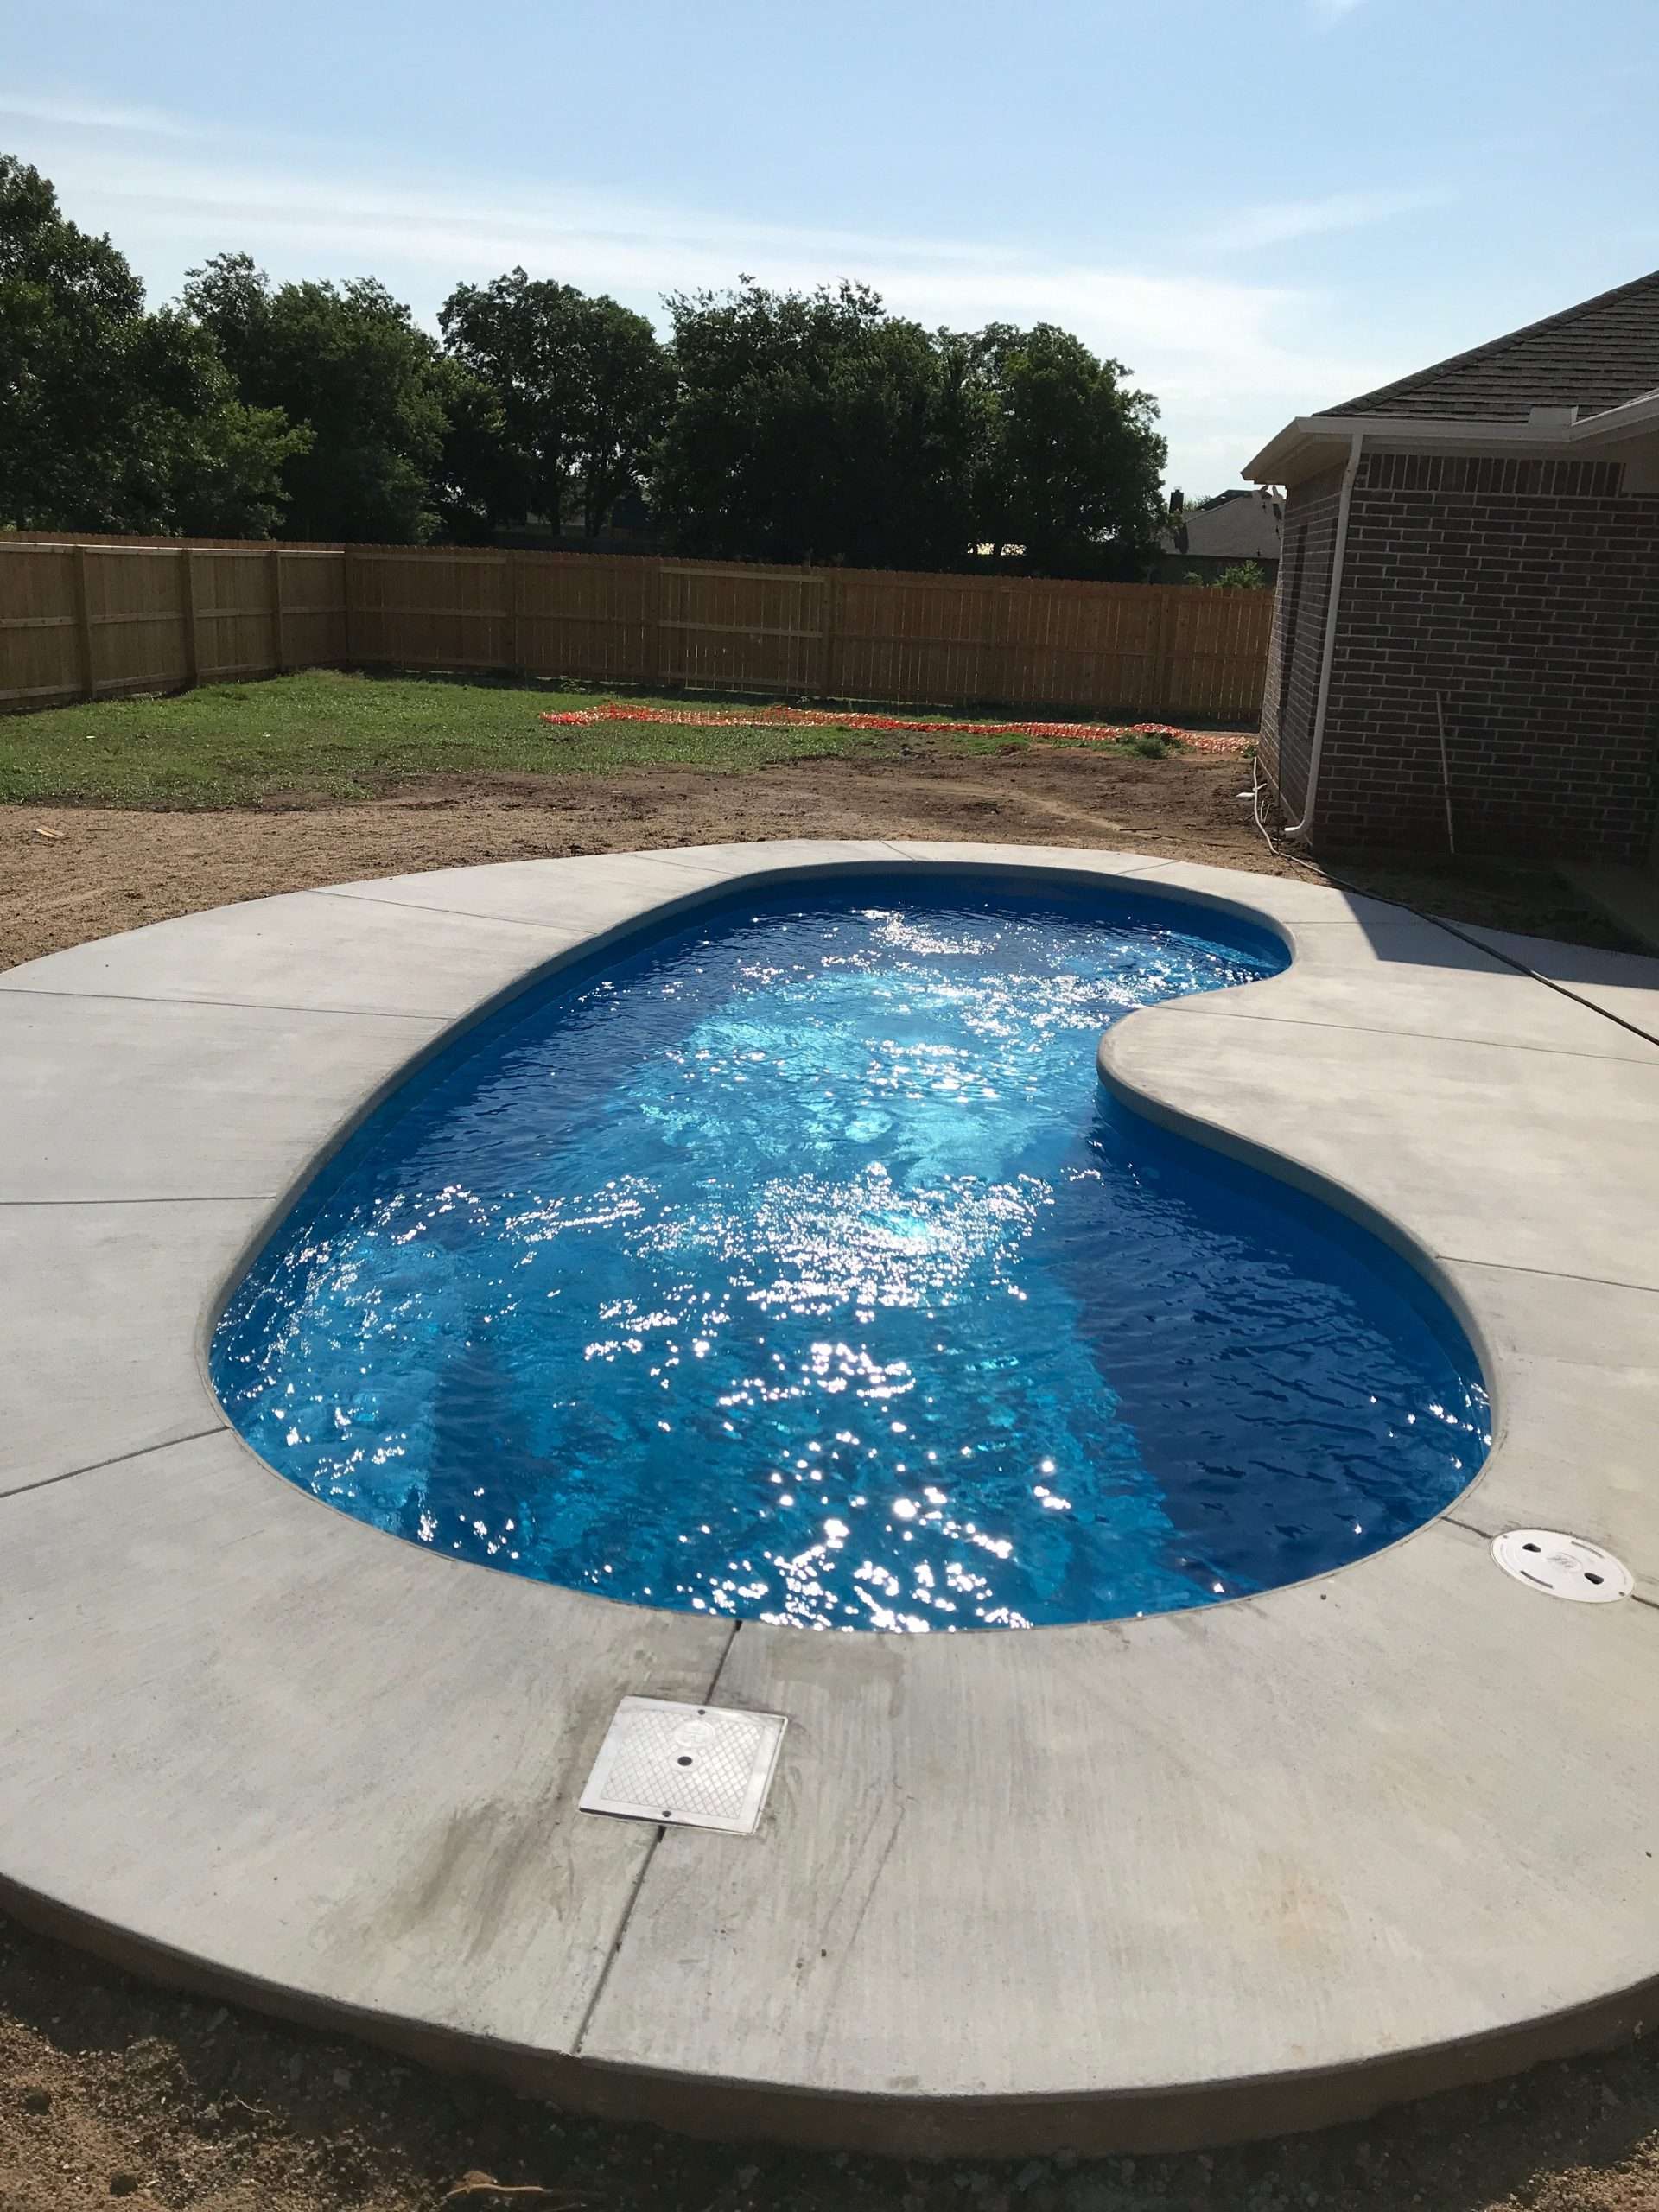 The Tioga Job â Seaside Pool With a Poured Concrete Deck